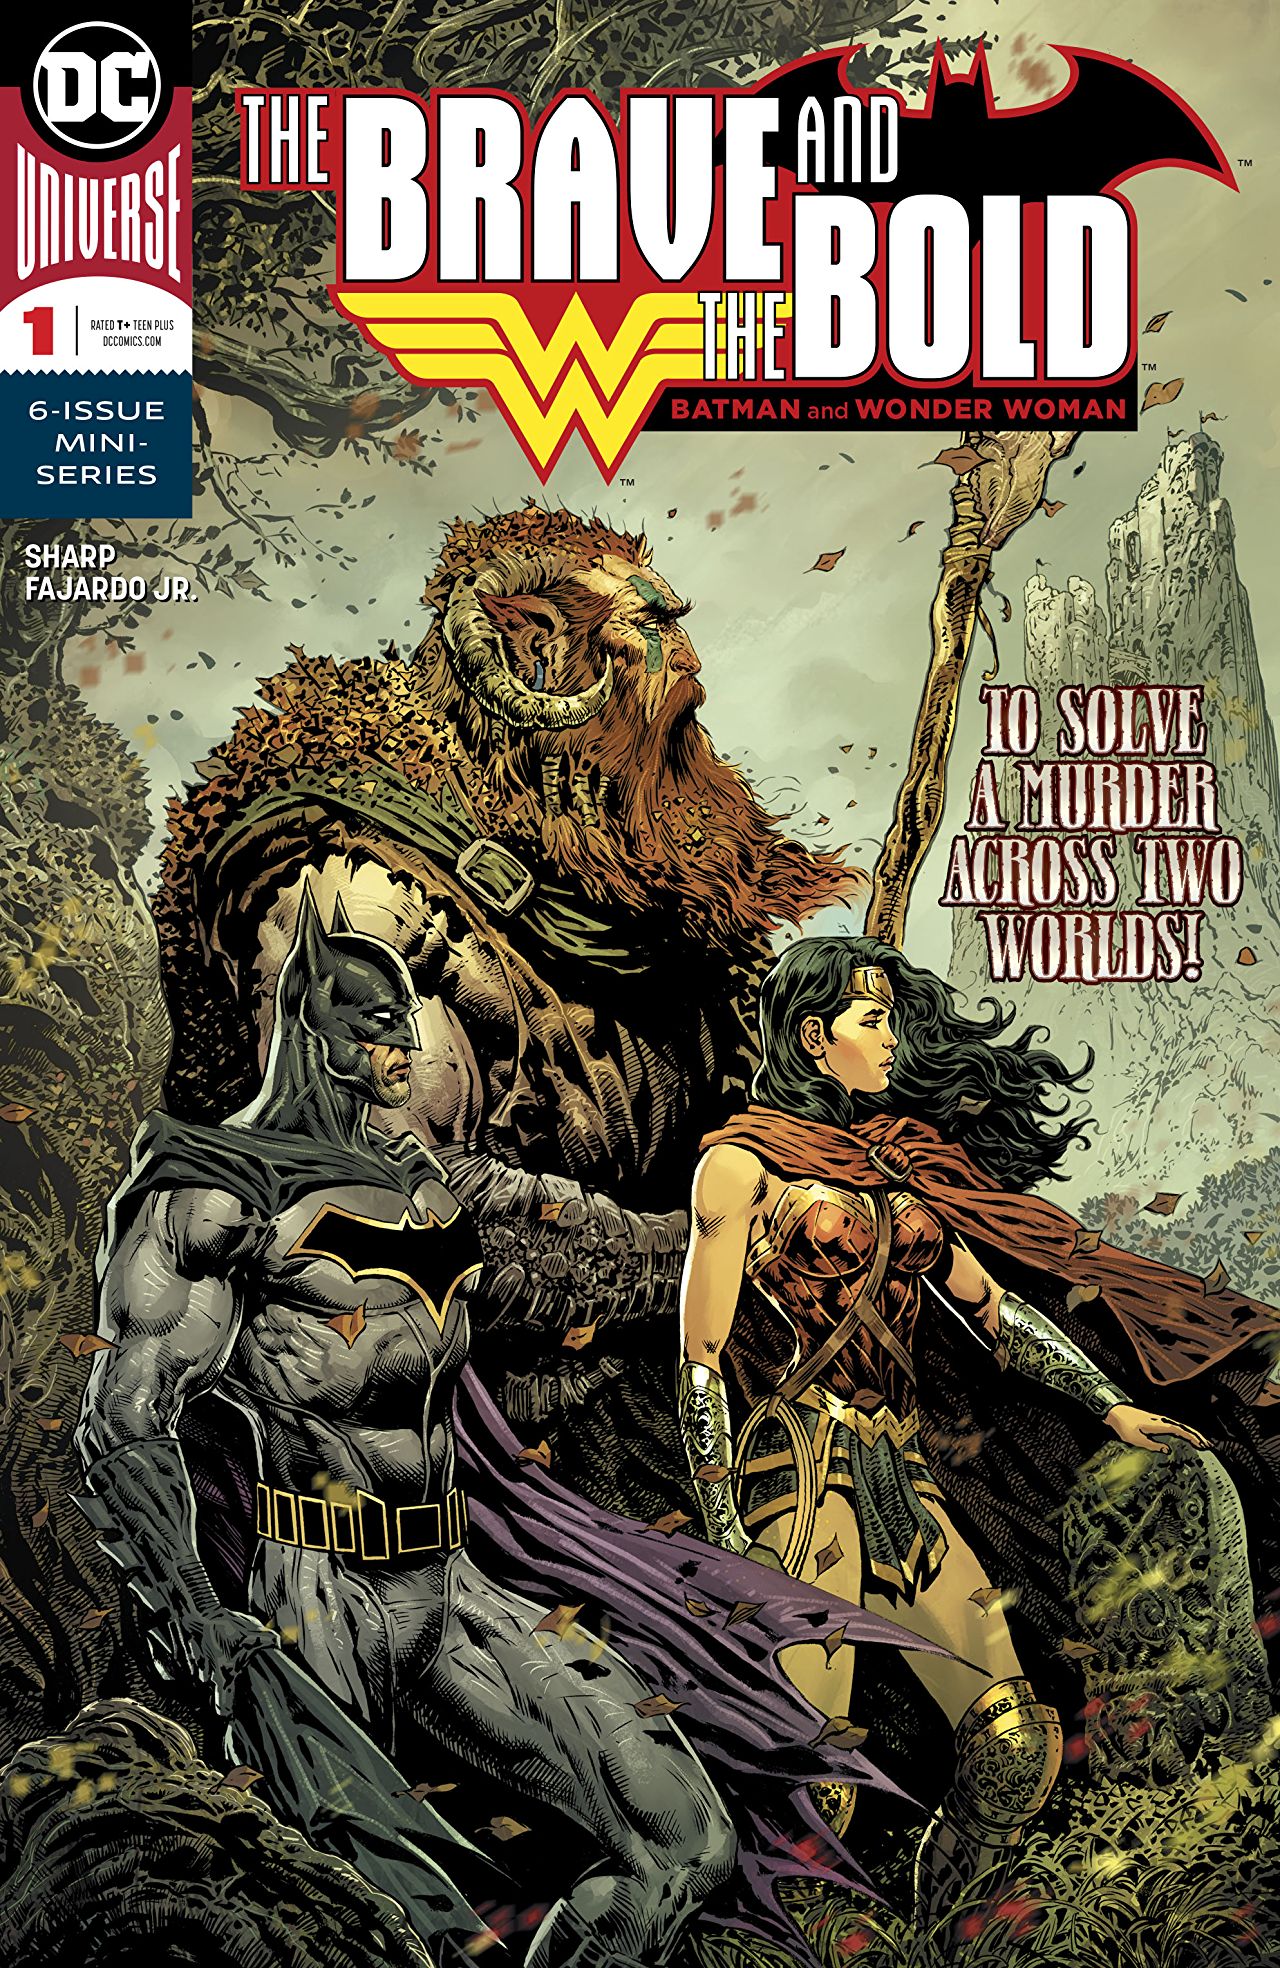 The Brave and the Bold: Batman and Wonder Woman #1 Review